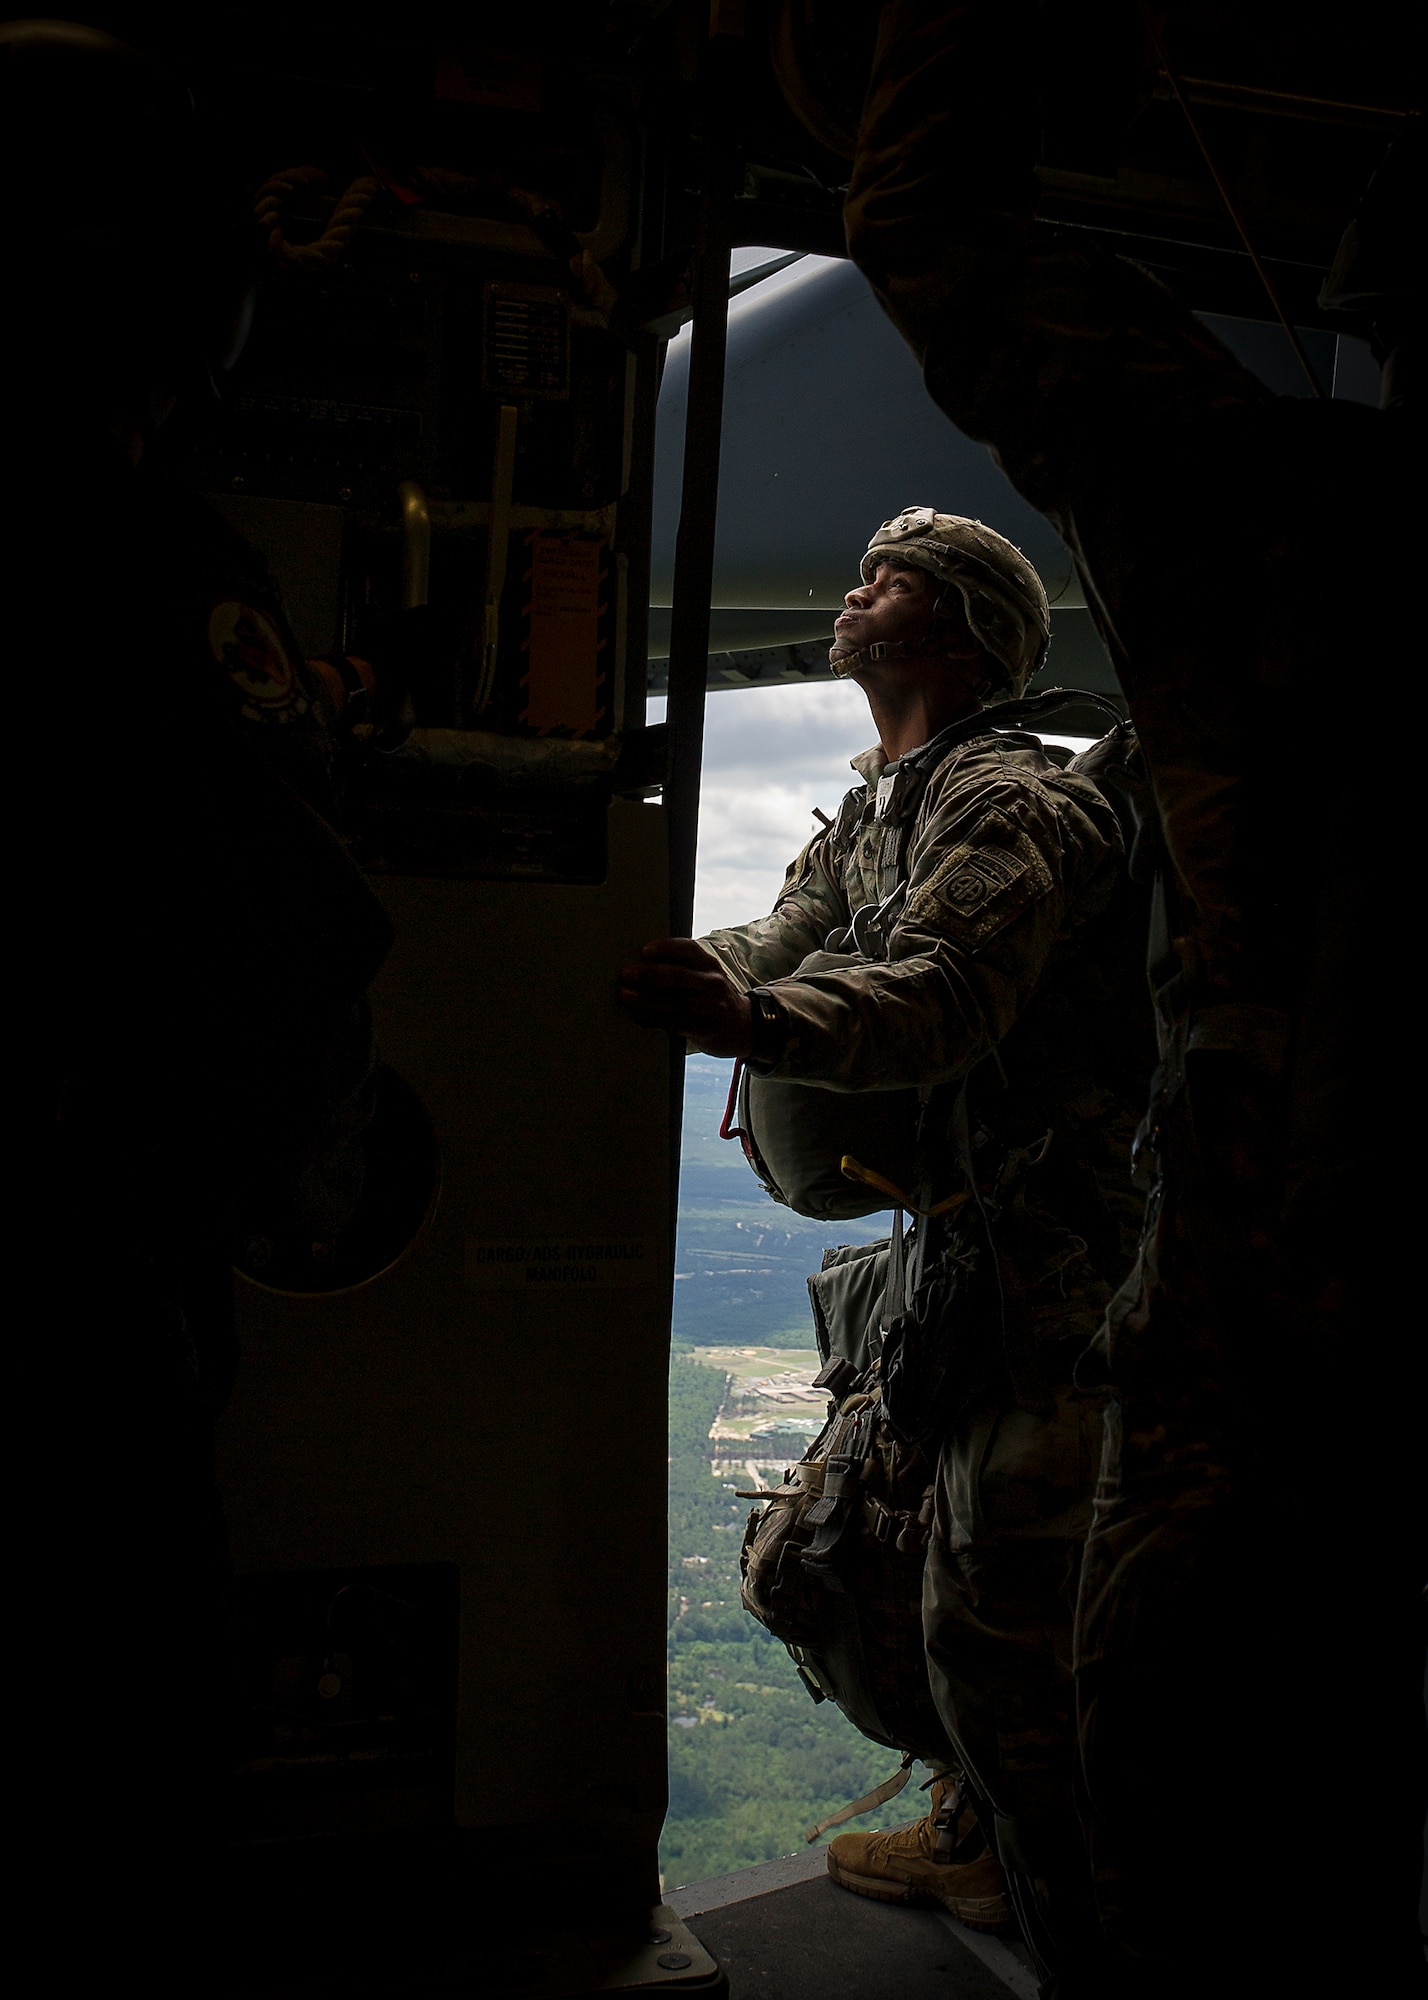 An 82nd Airbone Division jumpmaster checks outside a C-17 Globemaster III while en route to a Fort Bragg drop zone May 25.  Aircrews from the 315th and 437th Airlift Wings took off,  May 25, from Joint Base Charleston in 18 C-17 Globemaster IIIs within seconds of each other as part of a large formation exercise over Carolina skies. Exercise Bonny Jack was a joint service exercise with about 1,600 paratroopers from the 82nd Airborne Division at Fort Bragg.  (U.S. Air Force Photo / Master Sgt. Shane Ellis)
